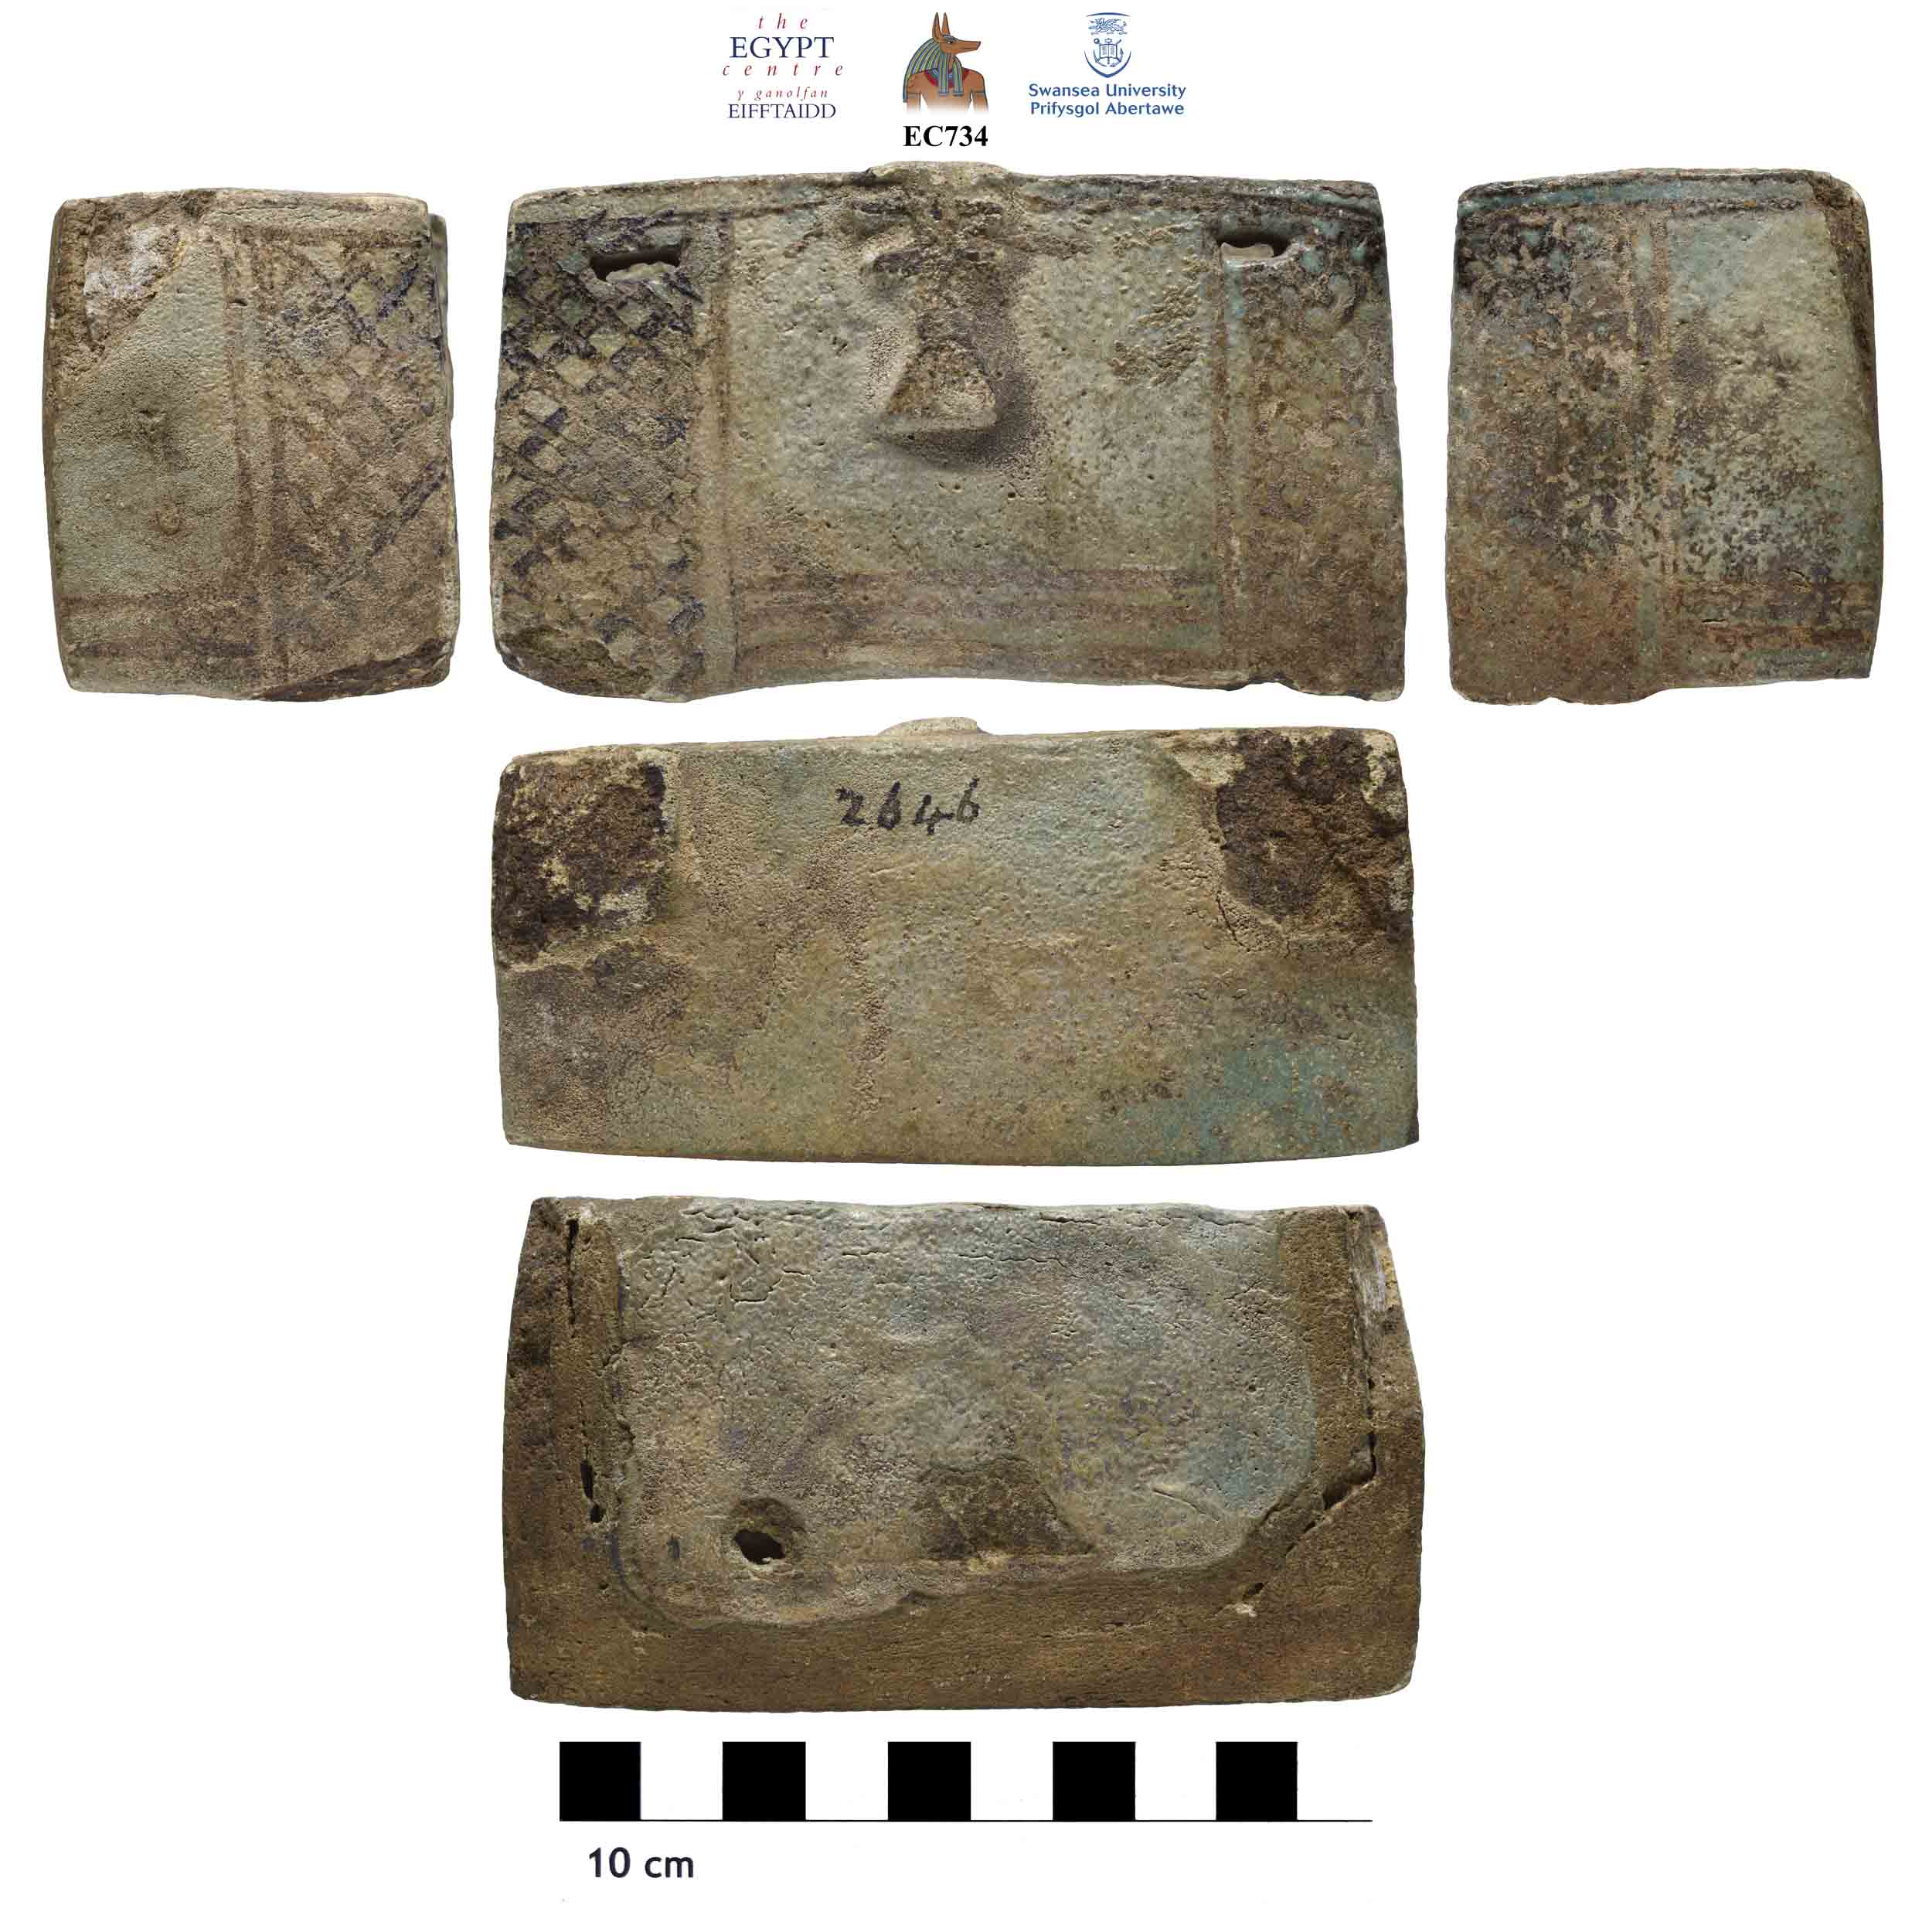 Image for: Faience box